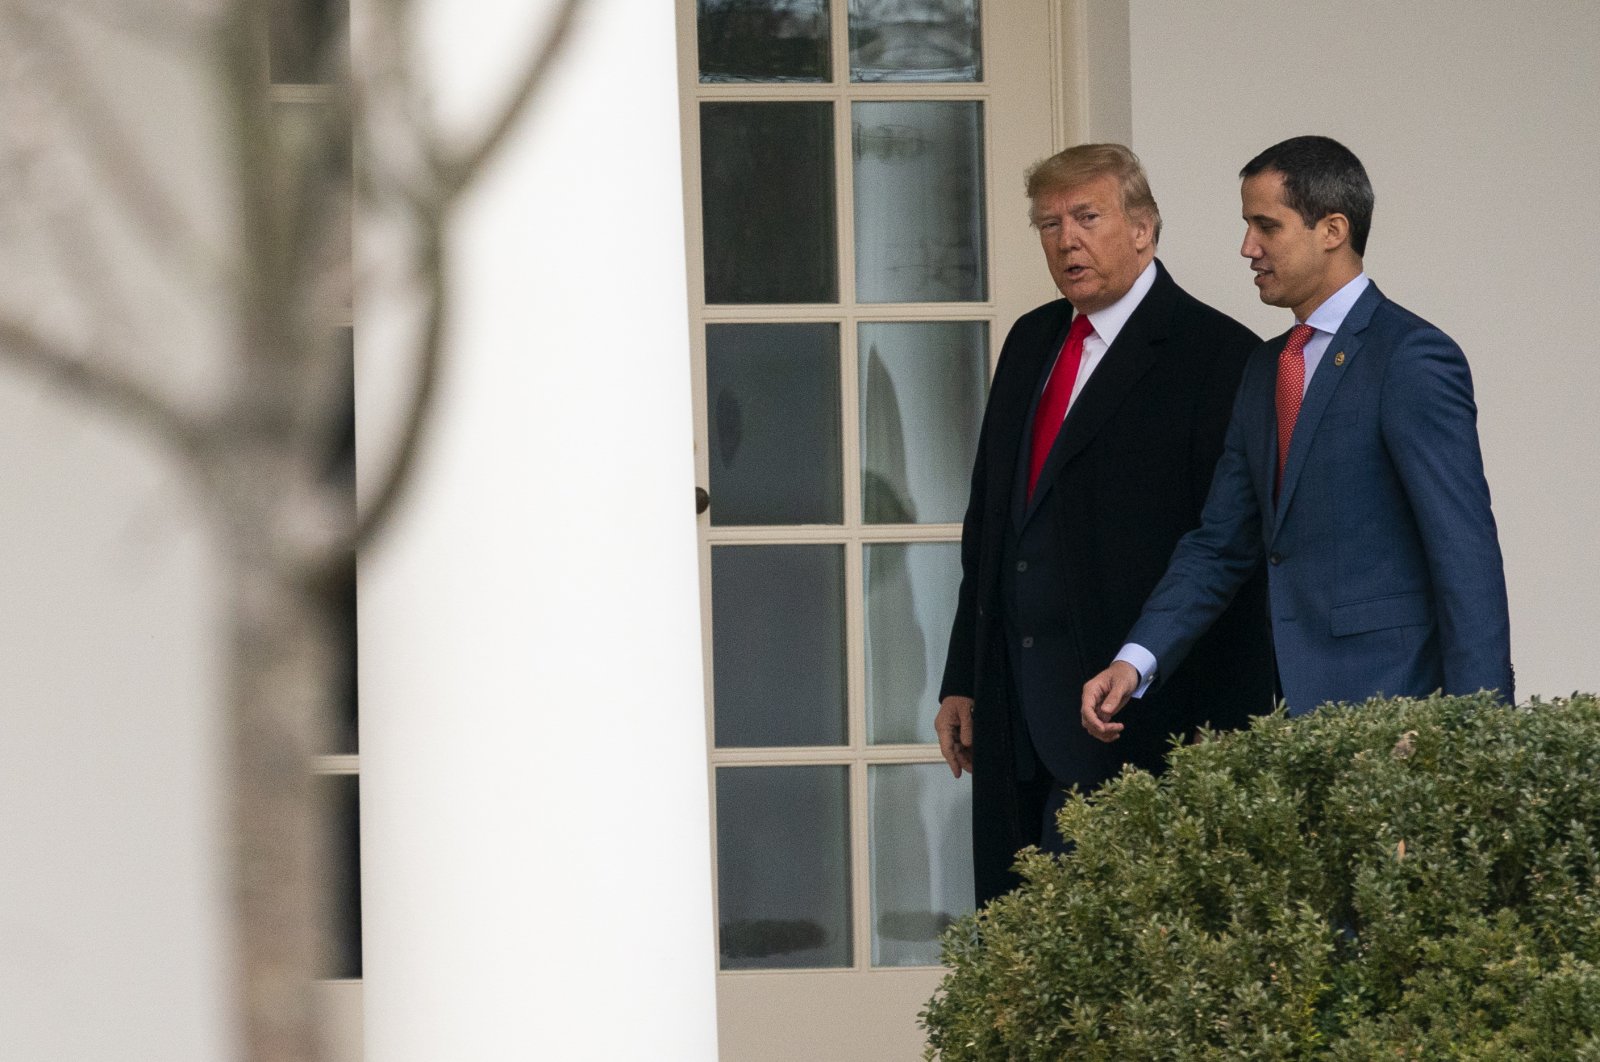 U.S. President Donald Trump walks to a meeting in the Oval Office with Venezuelan opposition leader Juan Guaido at the White House in Washington, Feb. 5, 2020. (AP Photo)